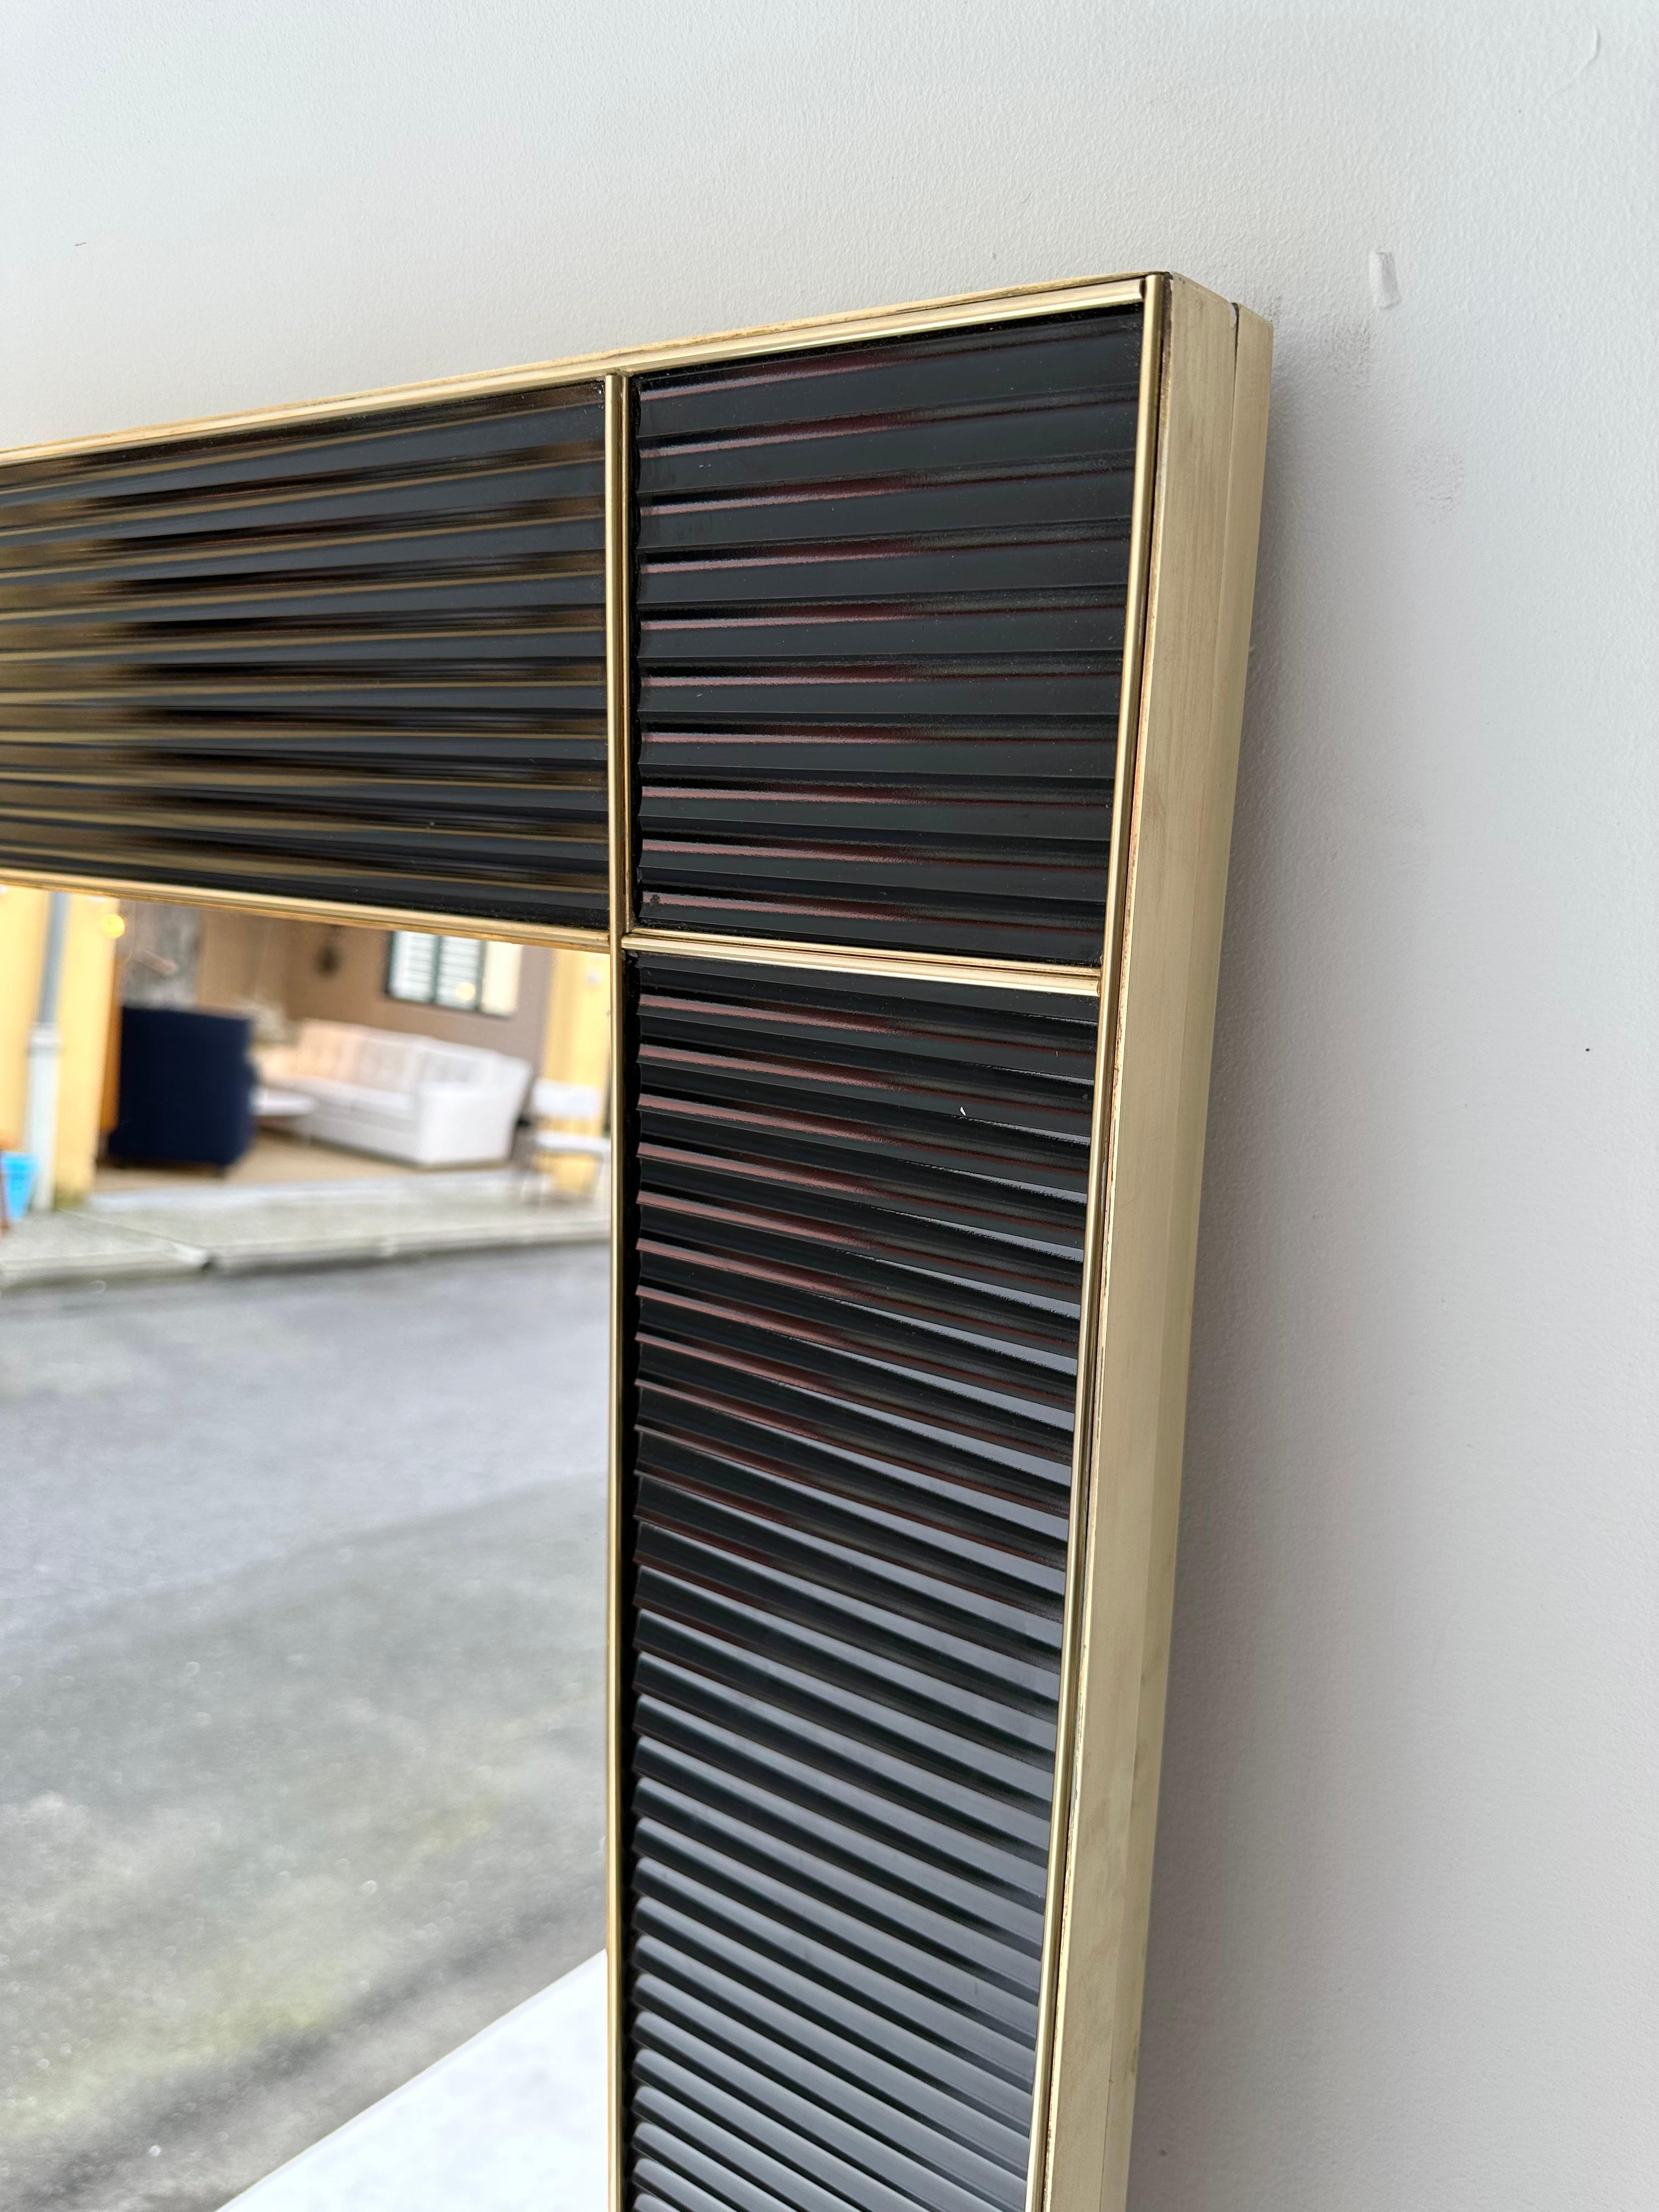 Wall mirror full brass and black fluted Murano glass. Small artisanal production from an italian workshop. Can be hang horizontally or vertically.